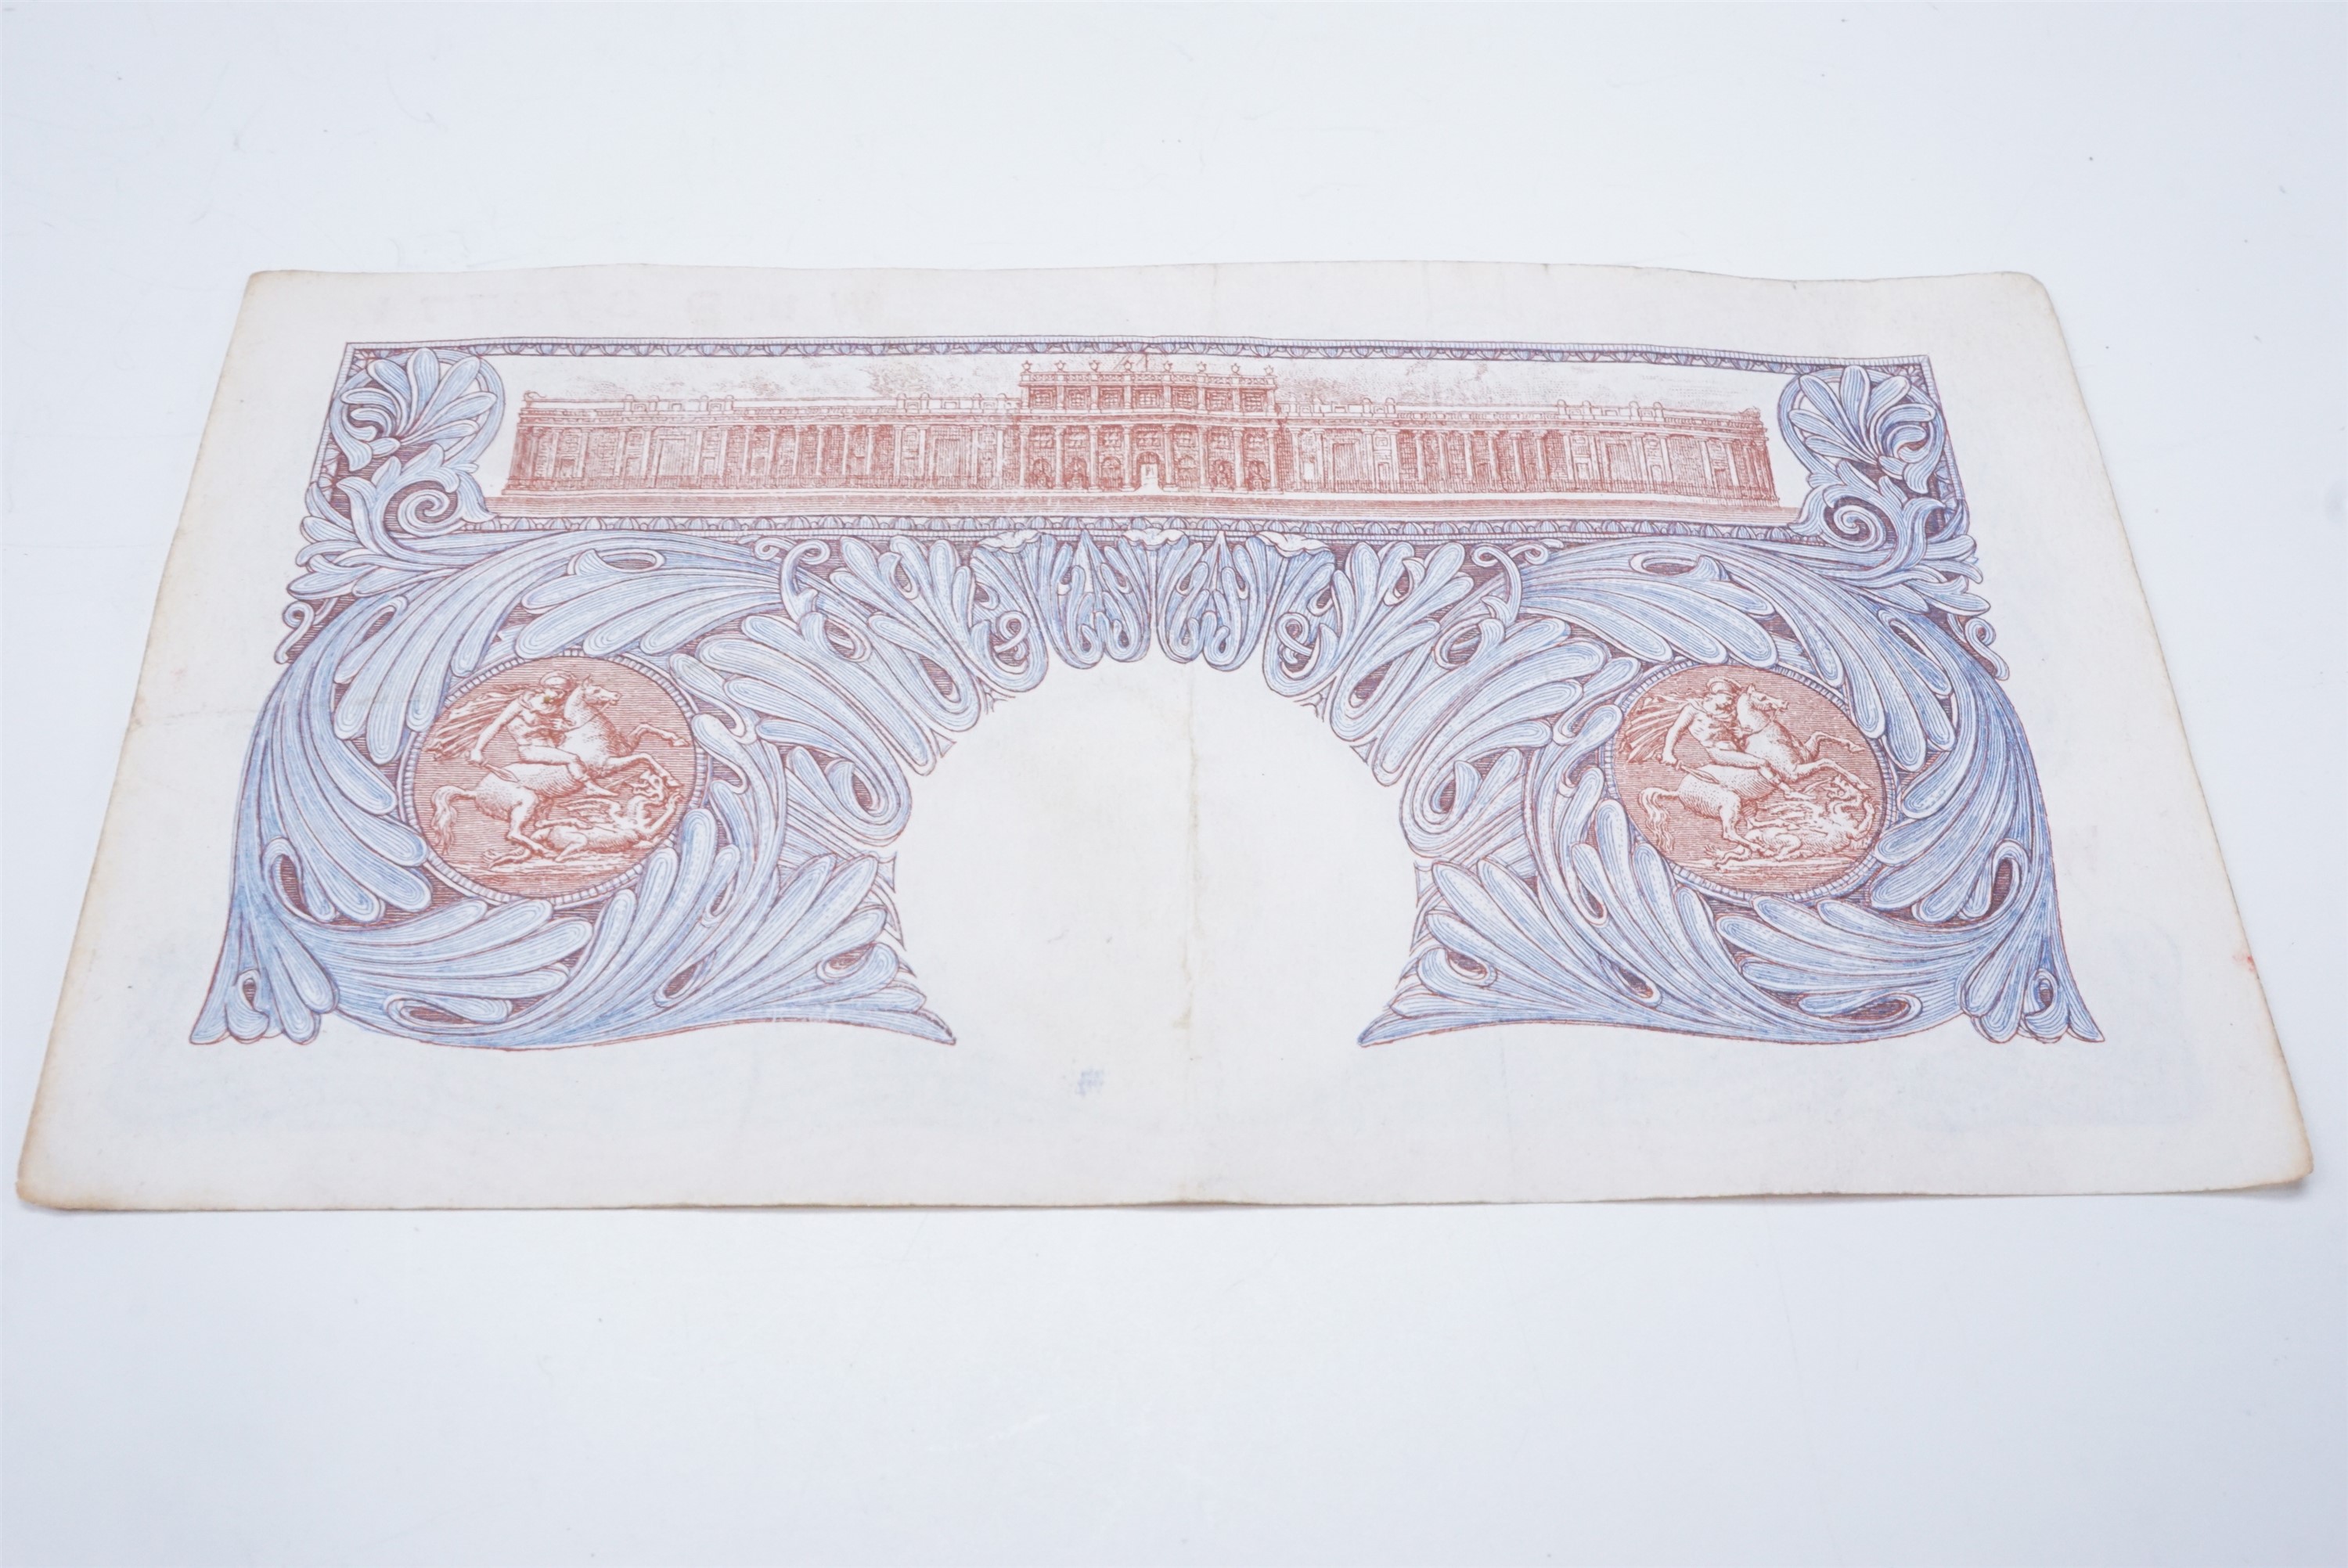 A Bank of England Peppiatt One Pound banknote, W11D 378771 - Image 2 of 2